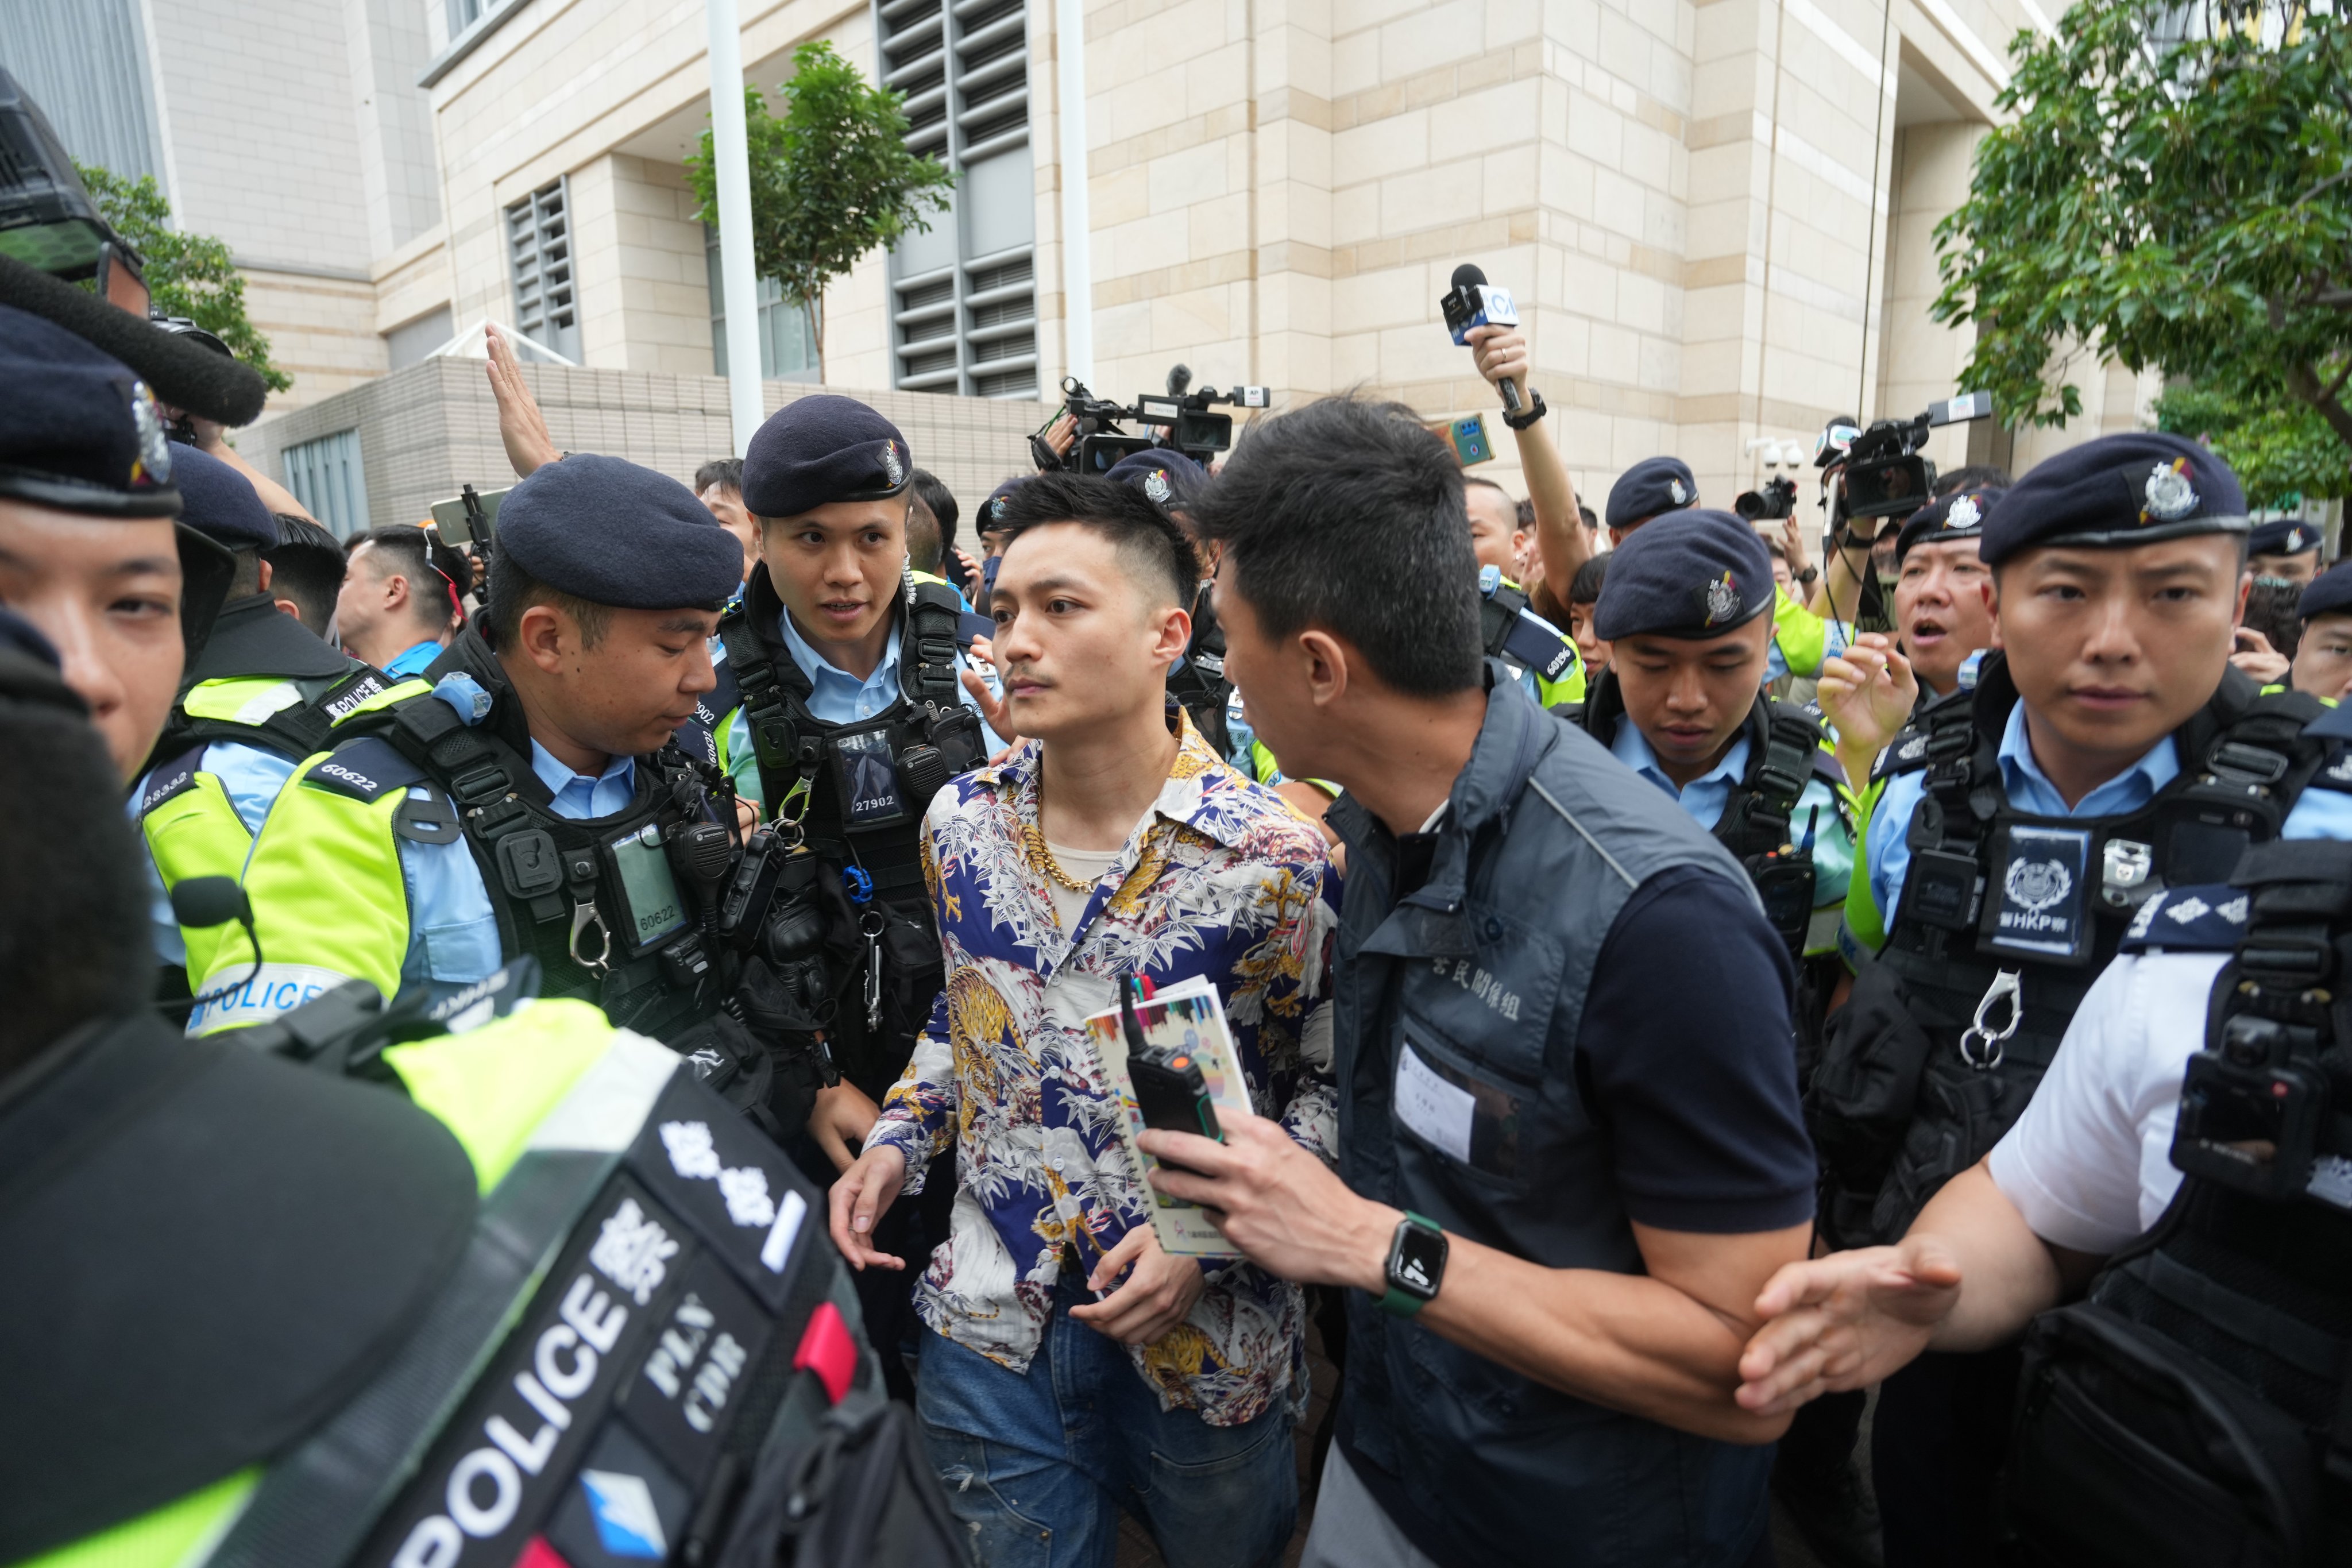 Former district councillor Lee Yue-shun was acquitted in the landmark “Hong Kong 47” subversion case. Photo: Sam Tsang